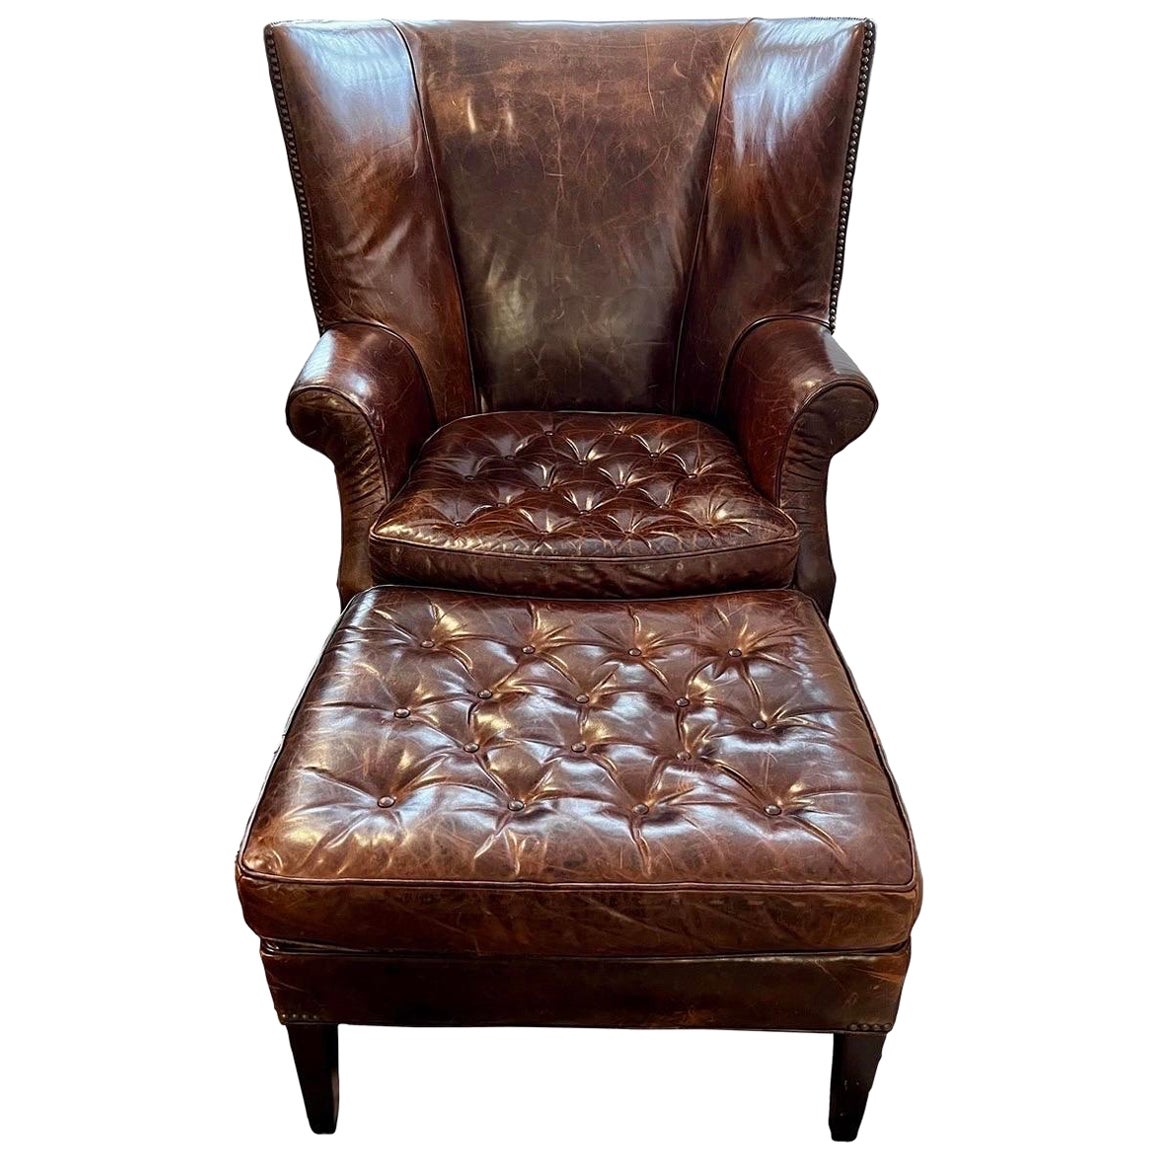  Distressed Brown Chesterfield Leather Wingback Chair & Matching Ottoman